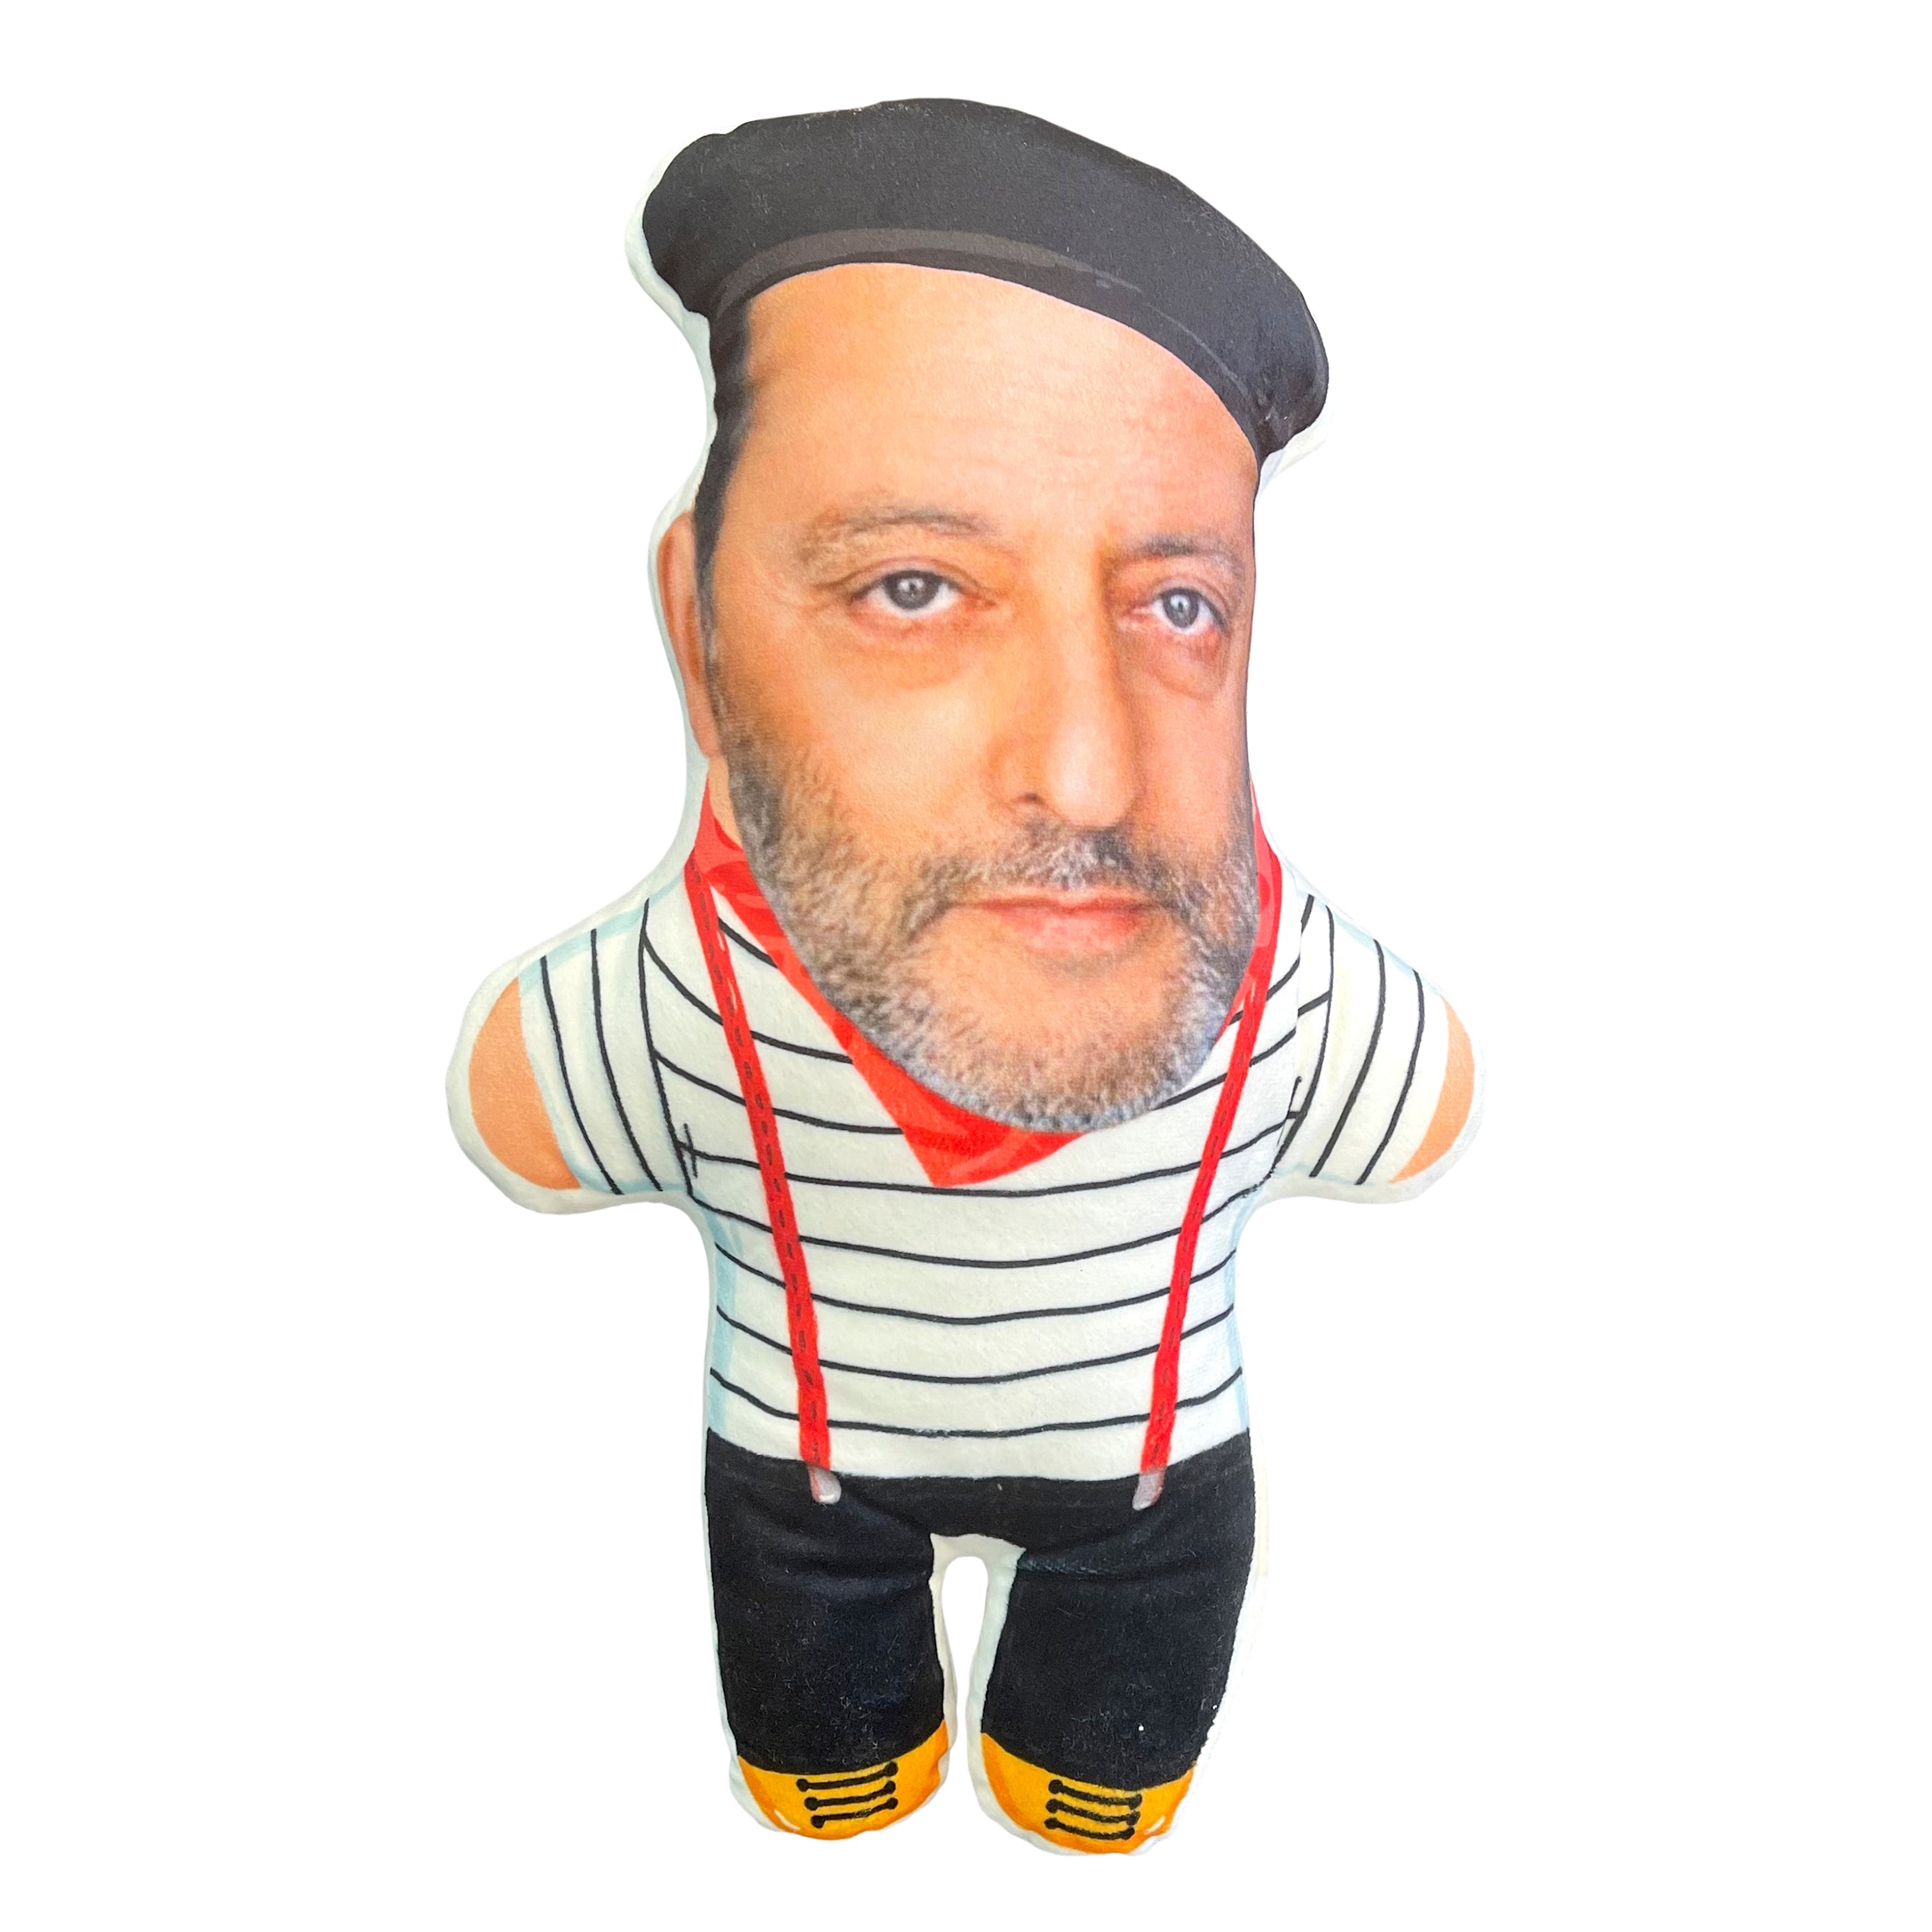 Gnome cushion with your photo "The Frenchman"